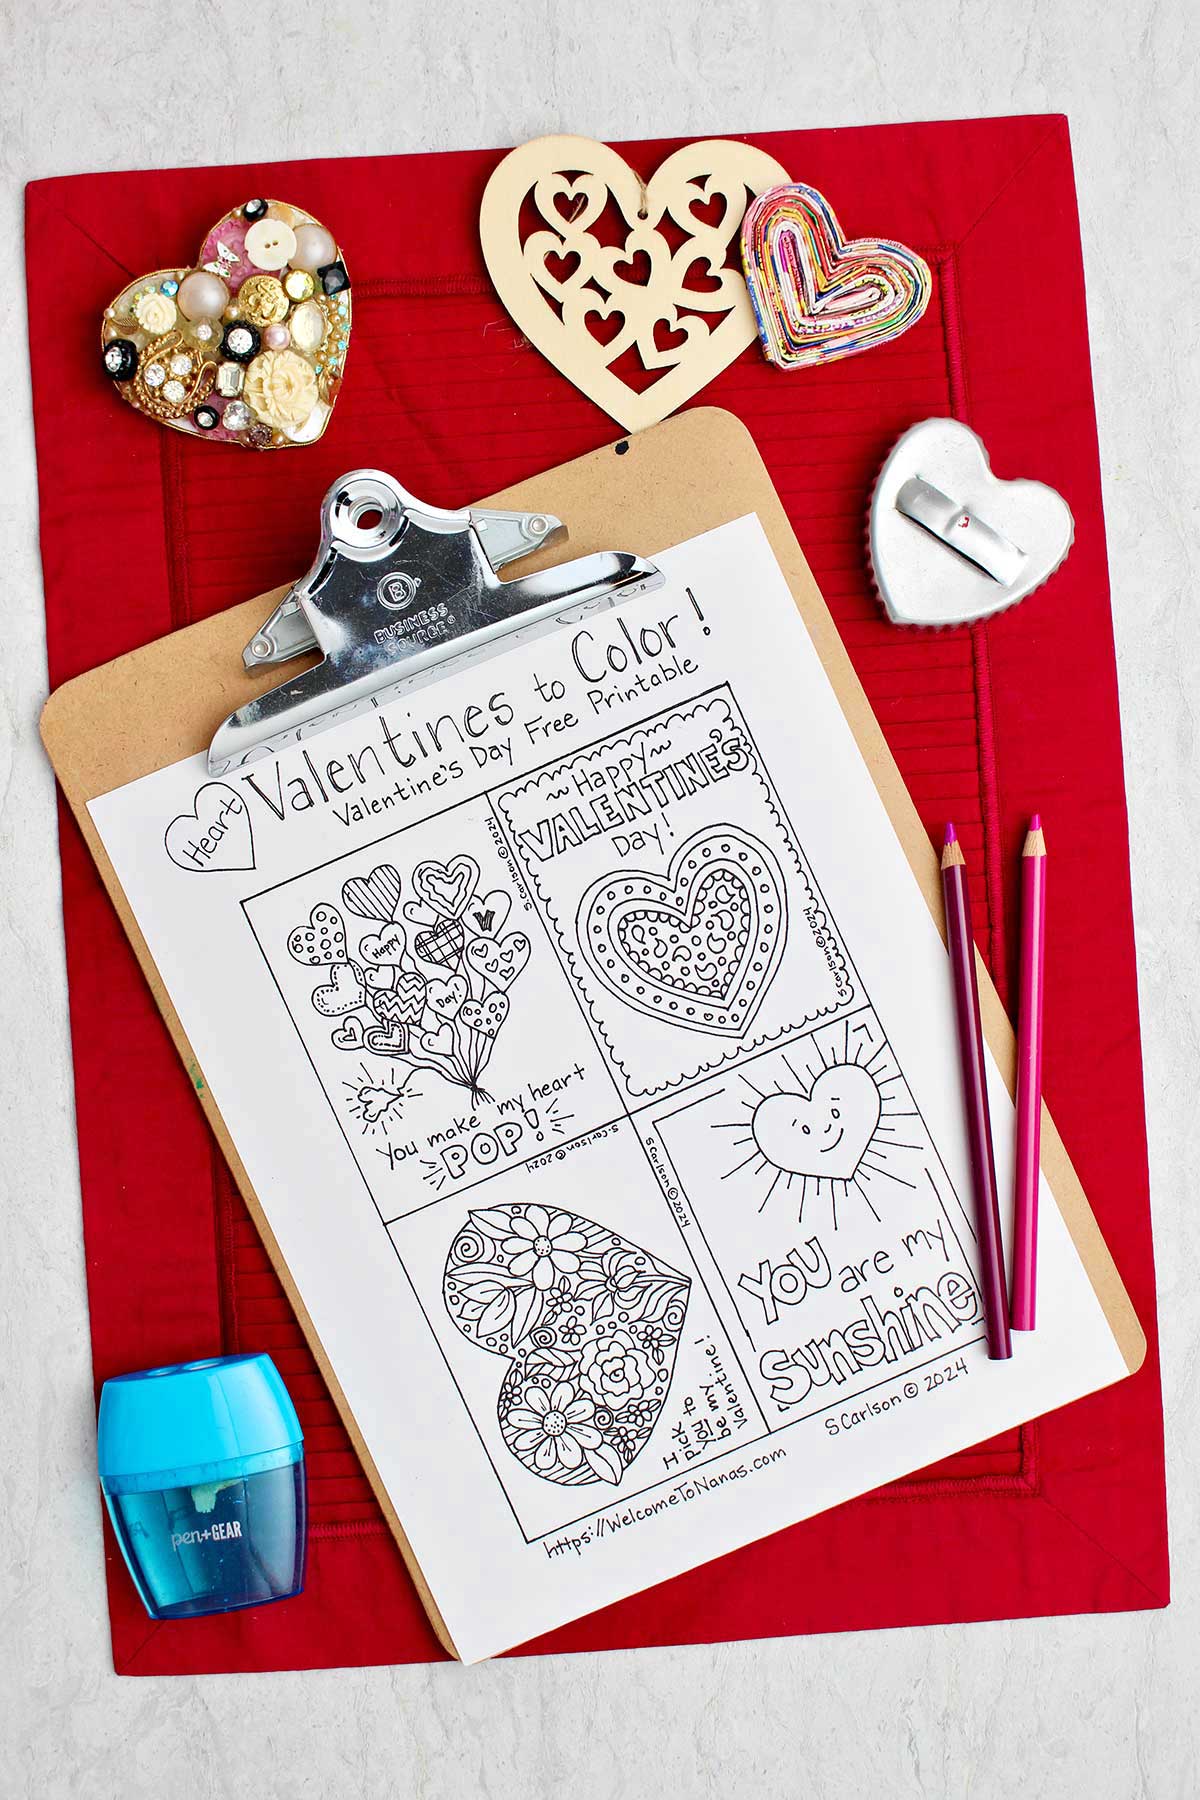 Uncolored Valentine's Day printable on a clip board resting on a red placemat with heart shaped objects and colored pencils resting near by.